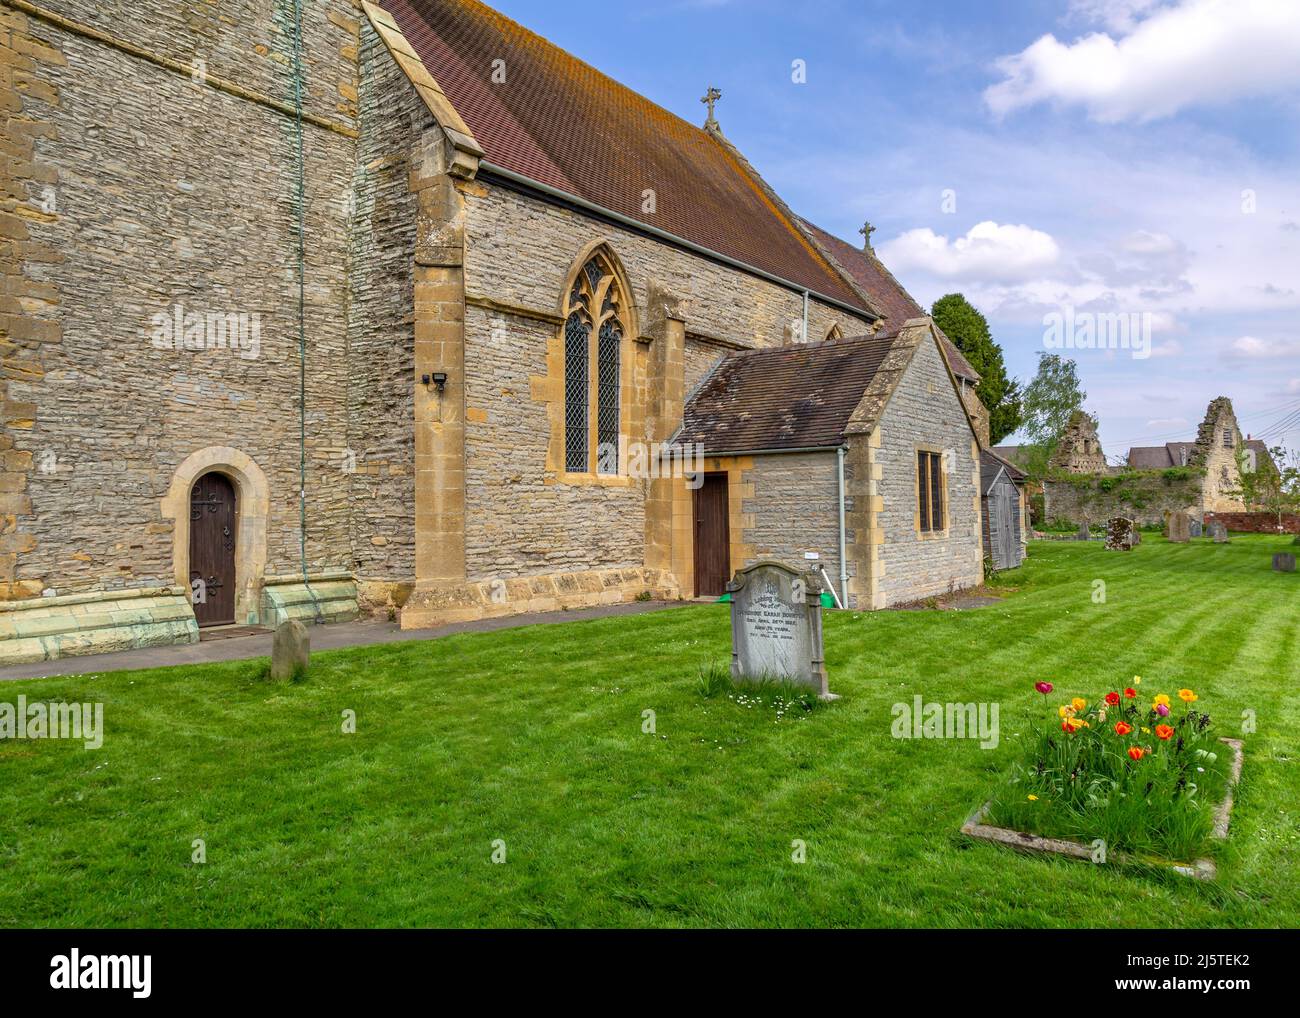 St. James the Great church in Harvington, Evesham, Worcestershire. Stock Photo